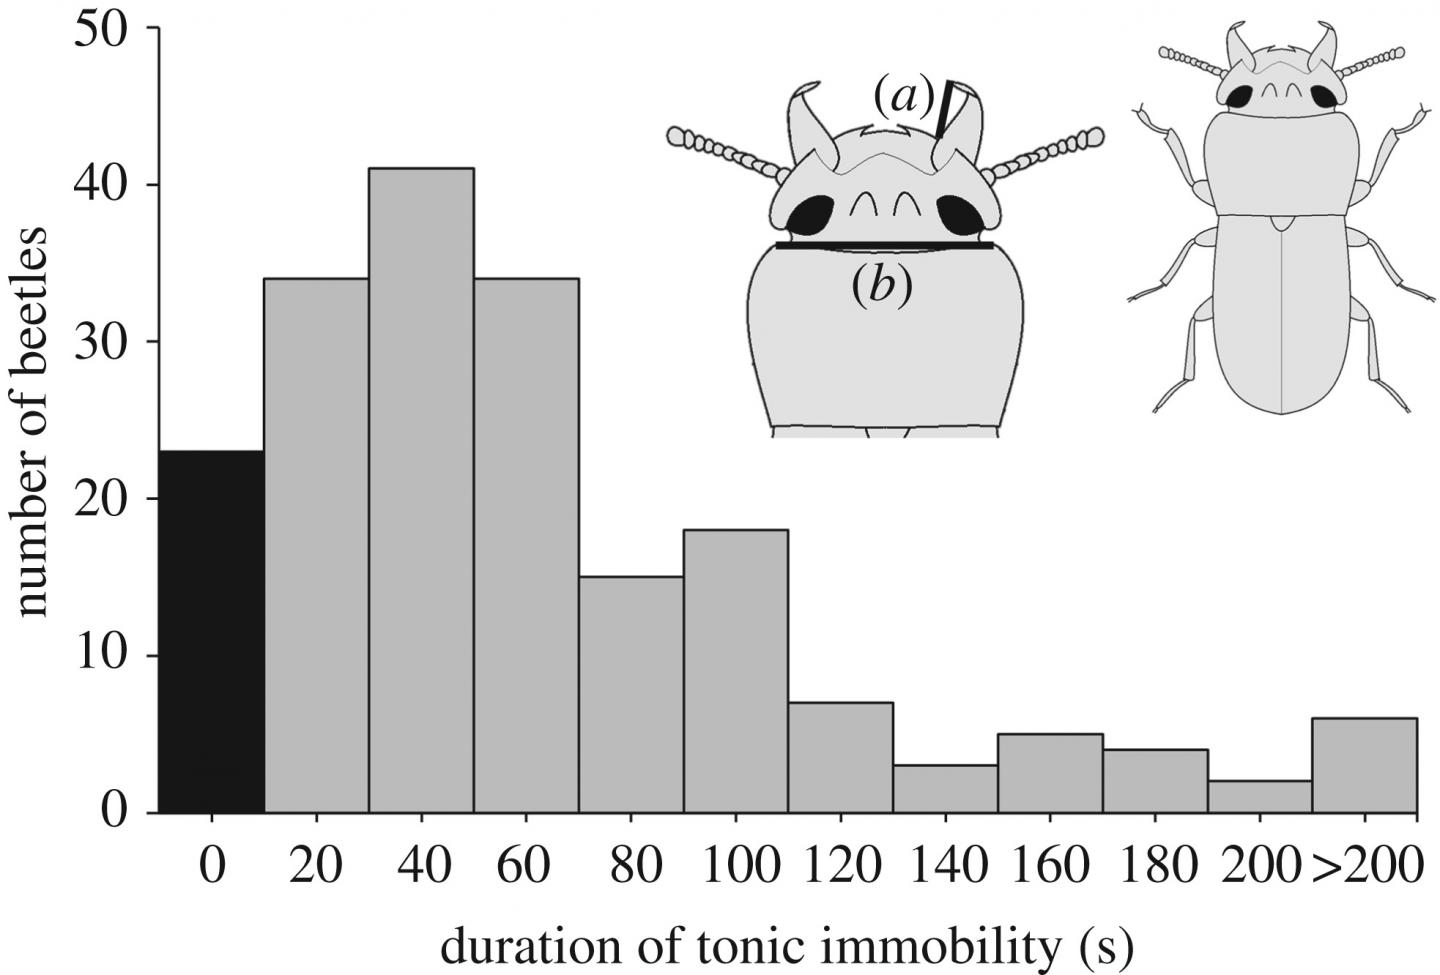 Distribution of the duration of tonic immobility in males of Gnathocerus cornutus.